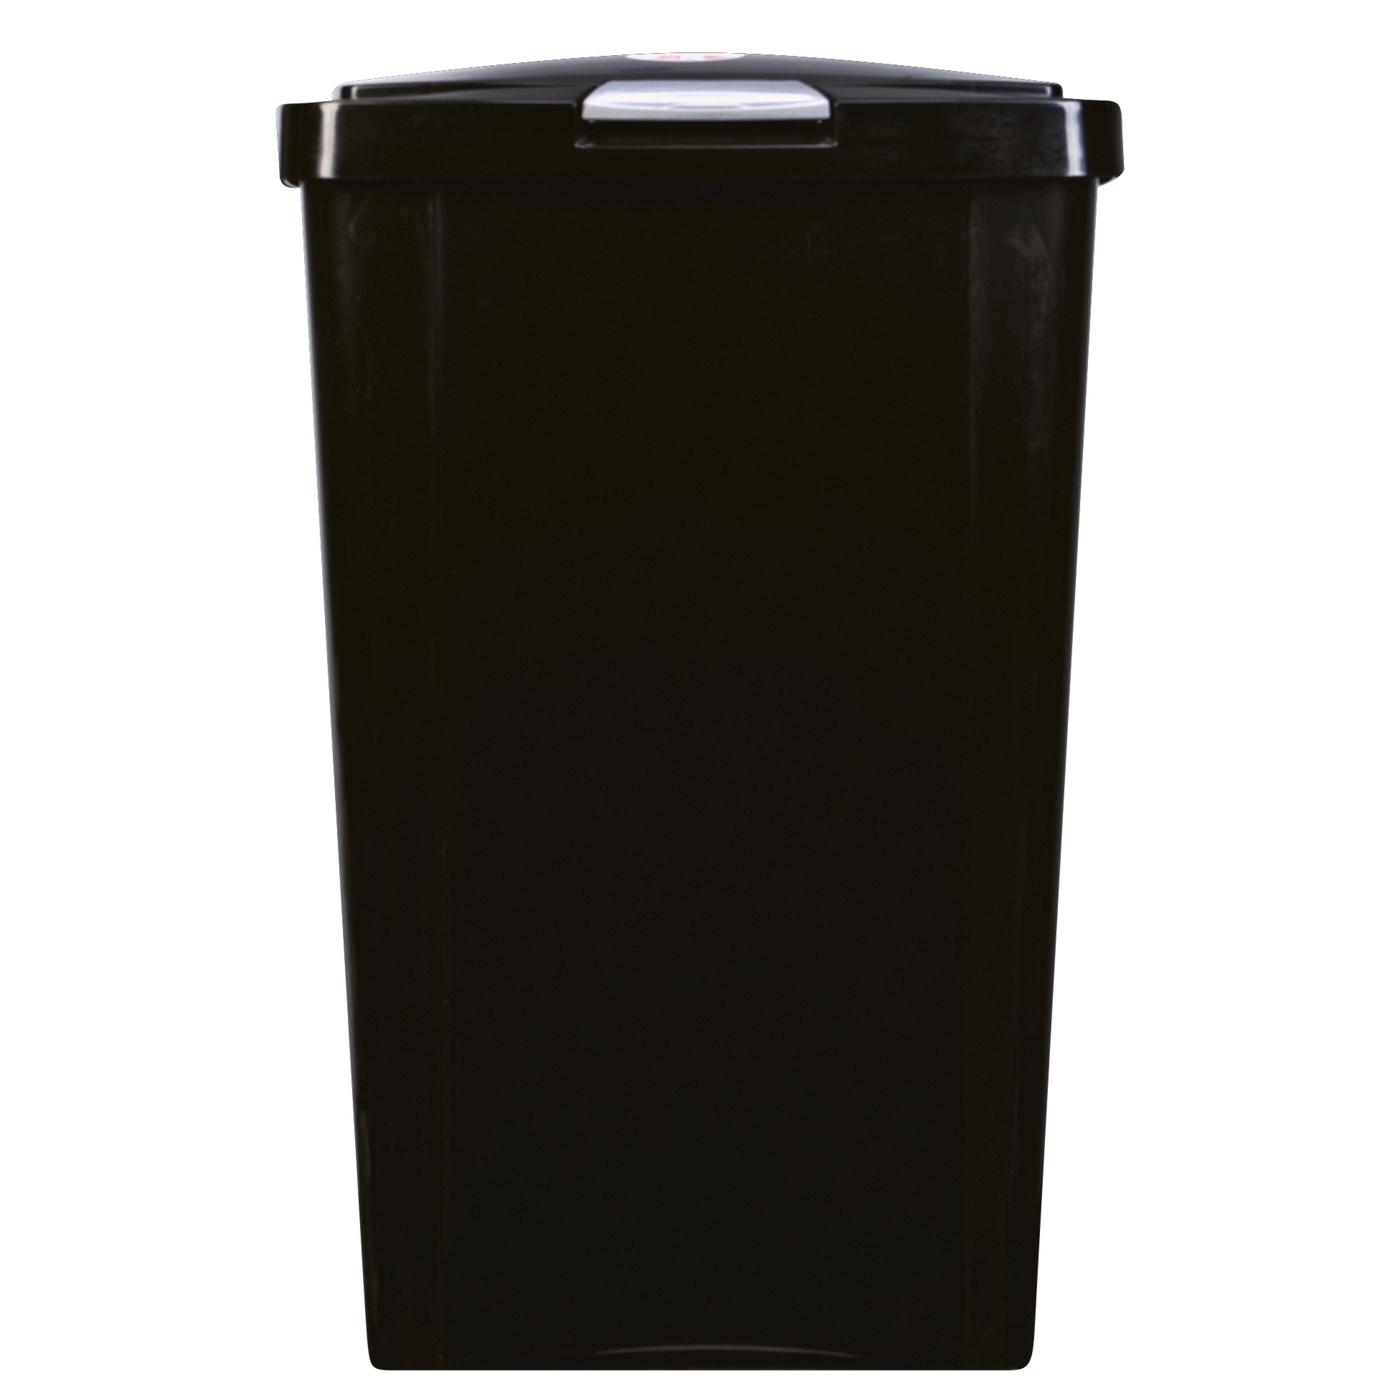 Sterilite Touch-Top Waste Basket - Black; image 1 of 3